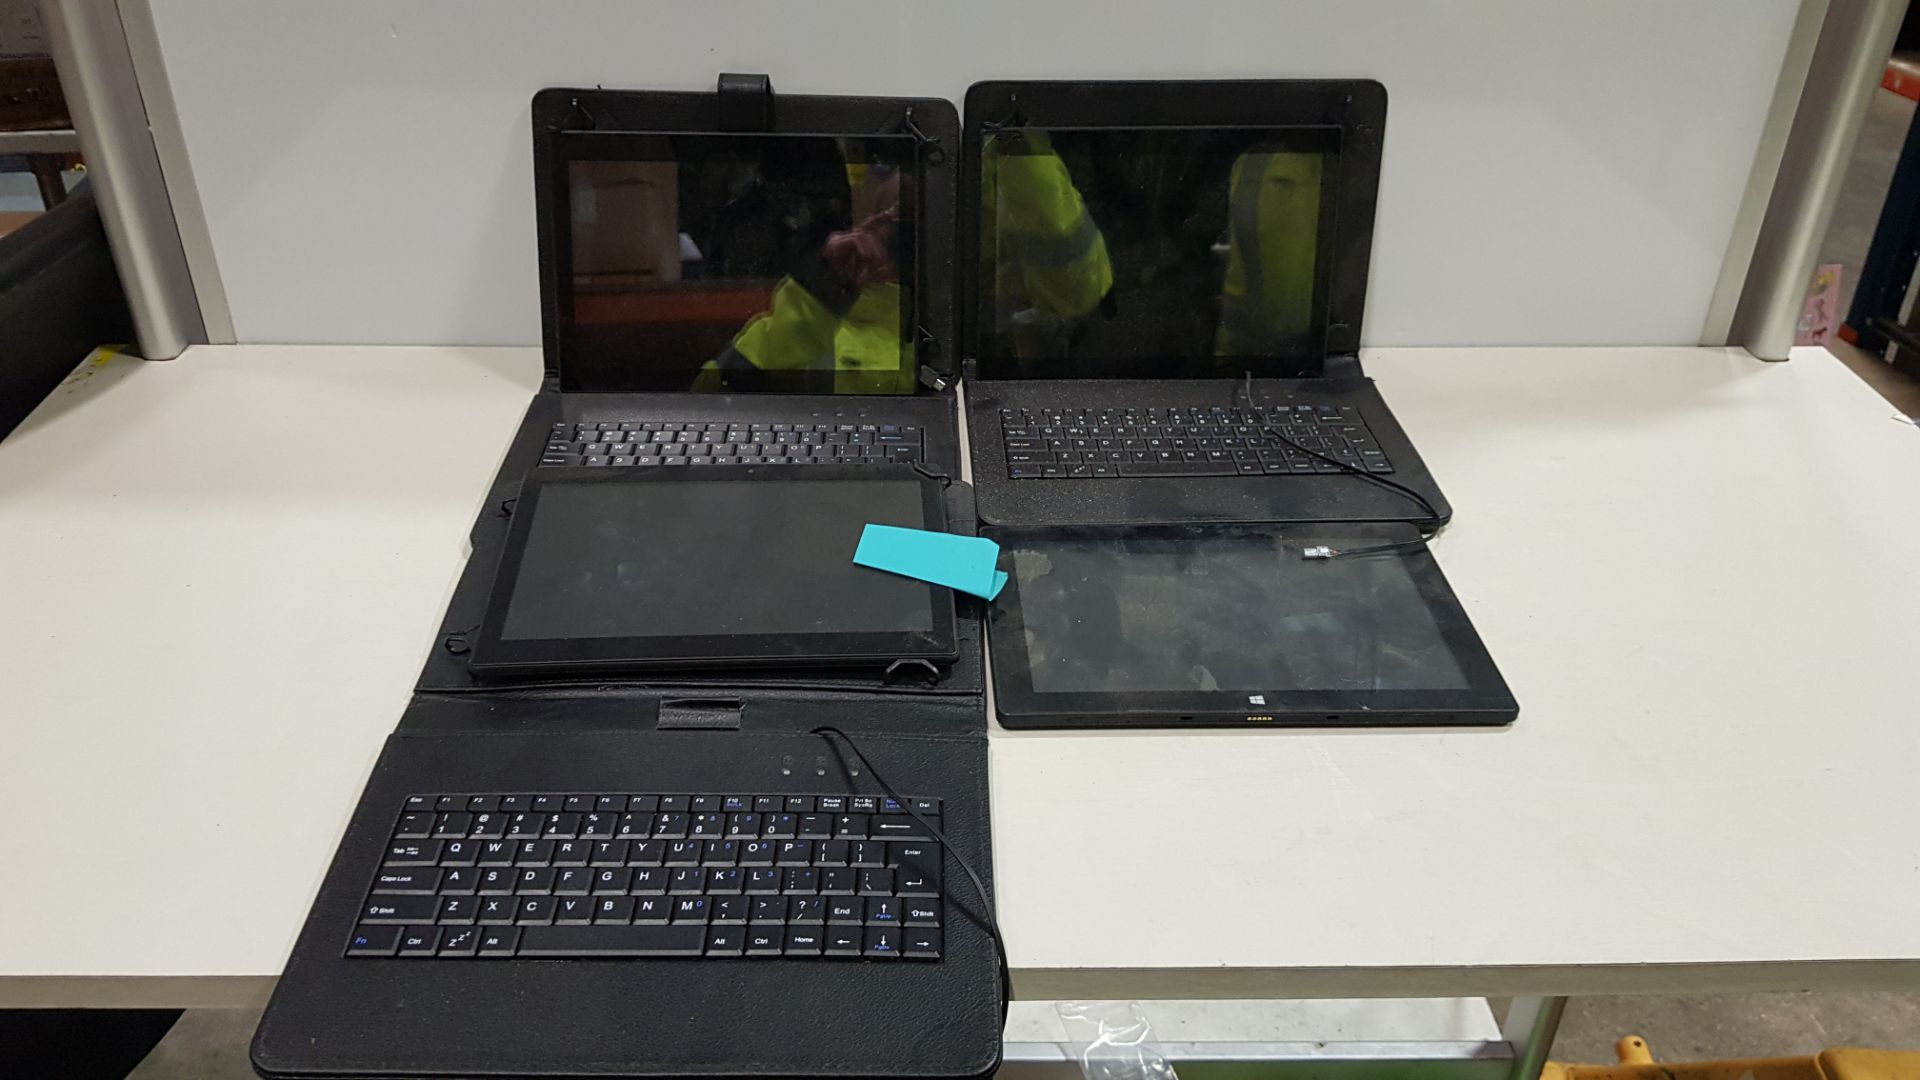 4 X VARIOUS TABLETS IE LINX INTEL MODEL LINX10 (CRACKED SCREEN) AND, 3 X ANDROID MARSHMELLOW MODEL